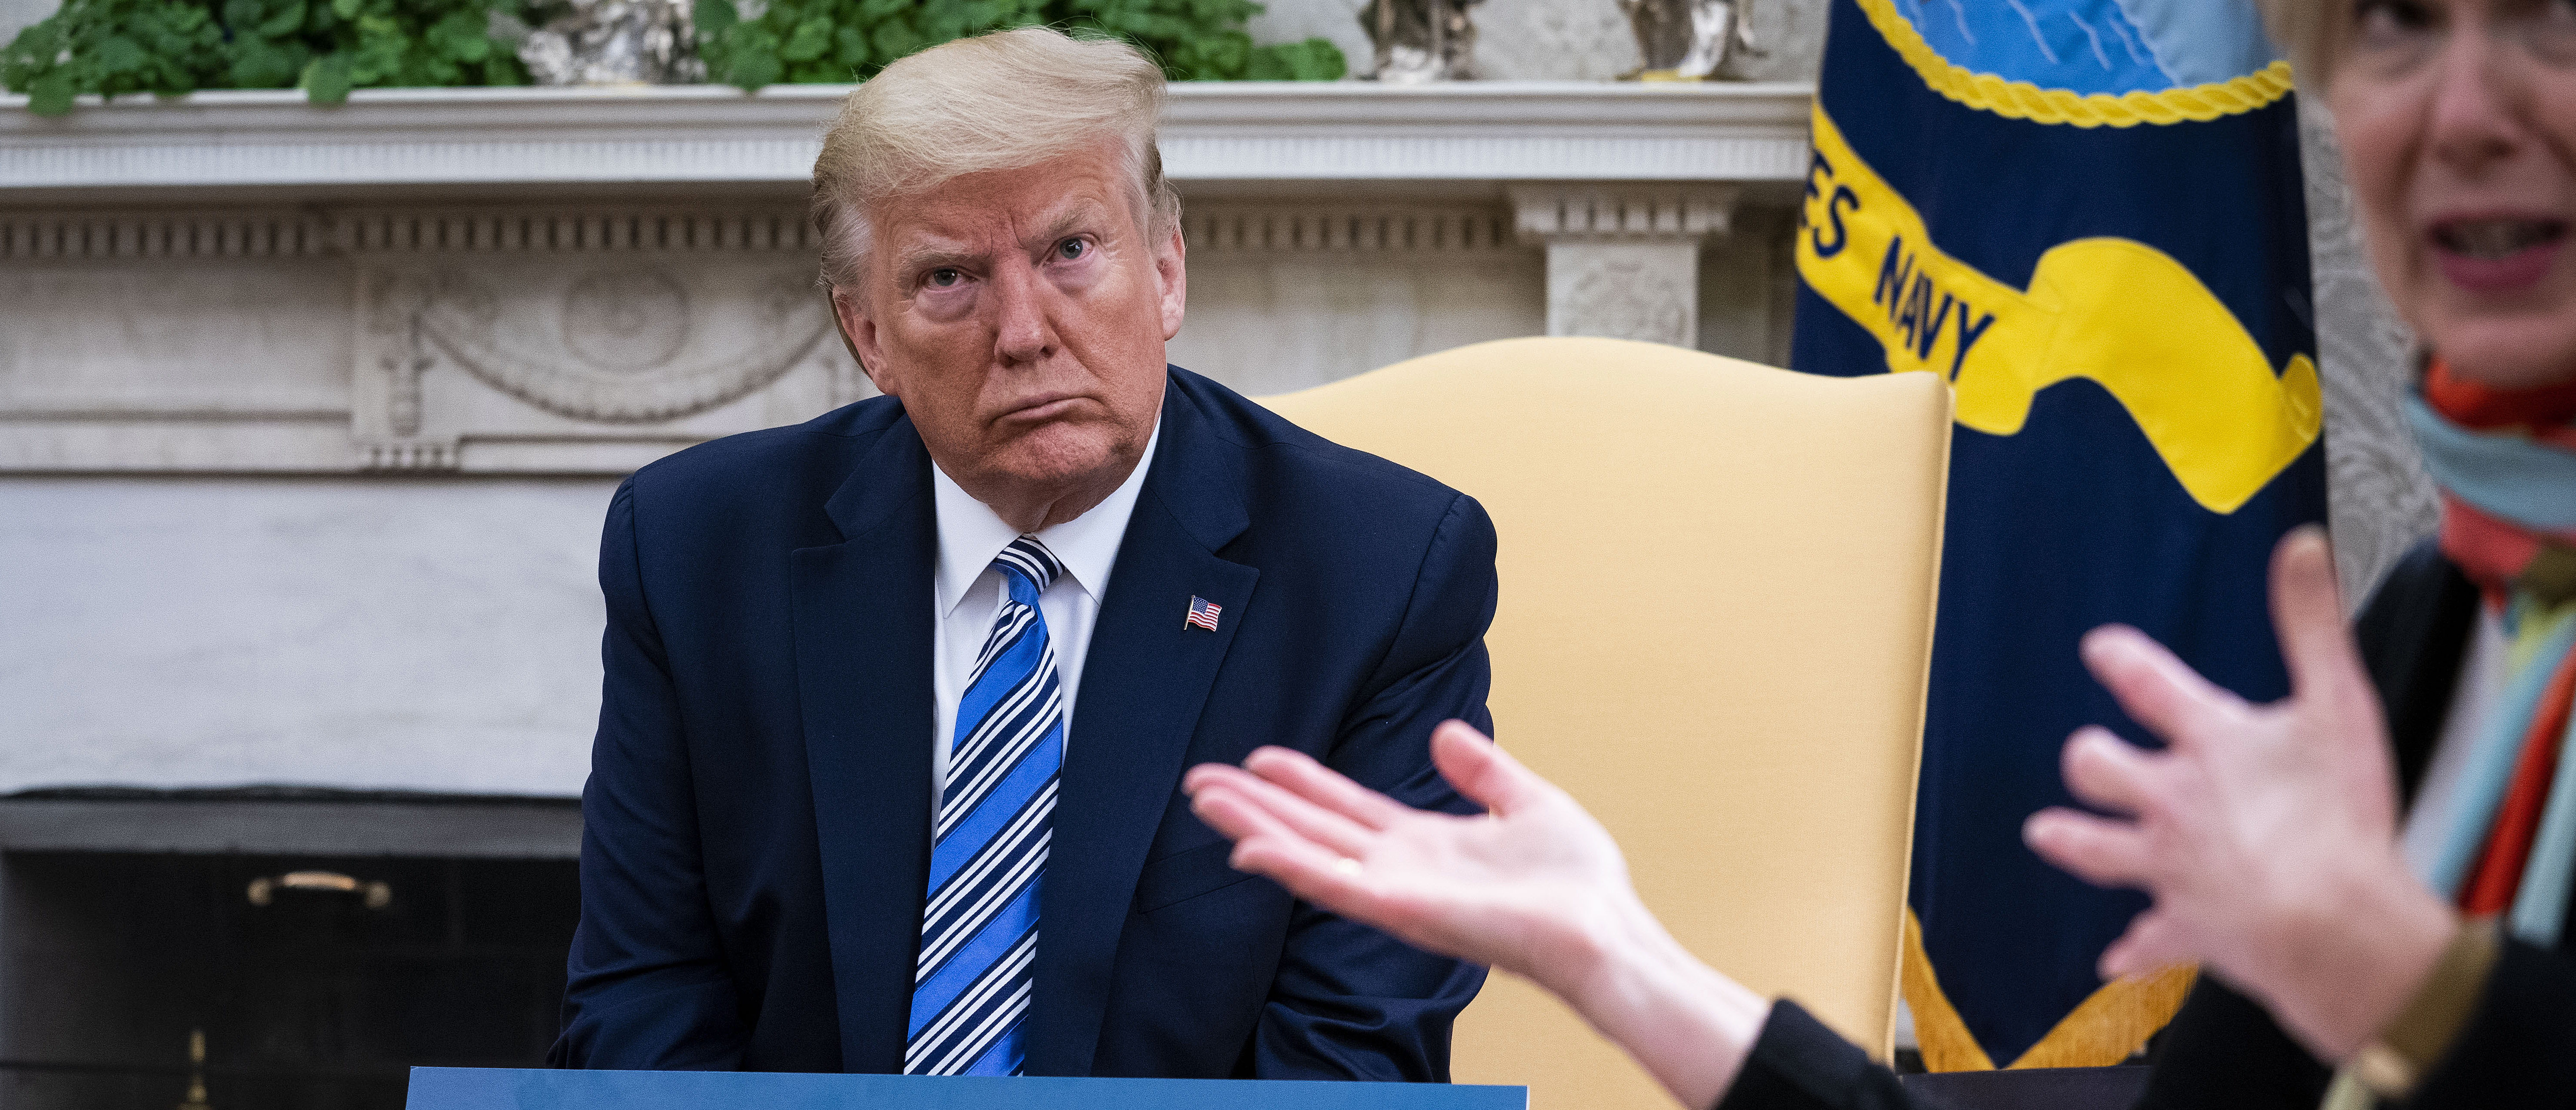 White House Coronavirus Task Force Coordinator Deborah Birx (R) answers a question while meeting with Florida Gov. Ron DeSantis and U.S. President Donald Trump in the Oval Office of the White House on April 28, 2020 in Washington, DC. (Doug Mills/The New York Times/Pool/Getty Images)